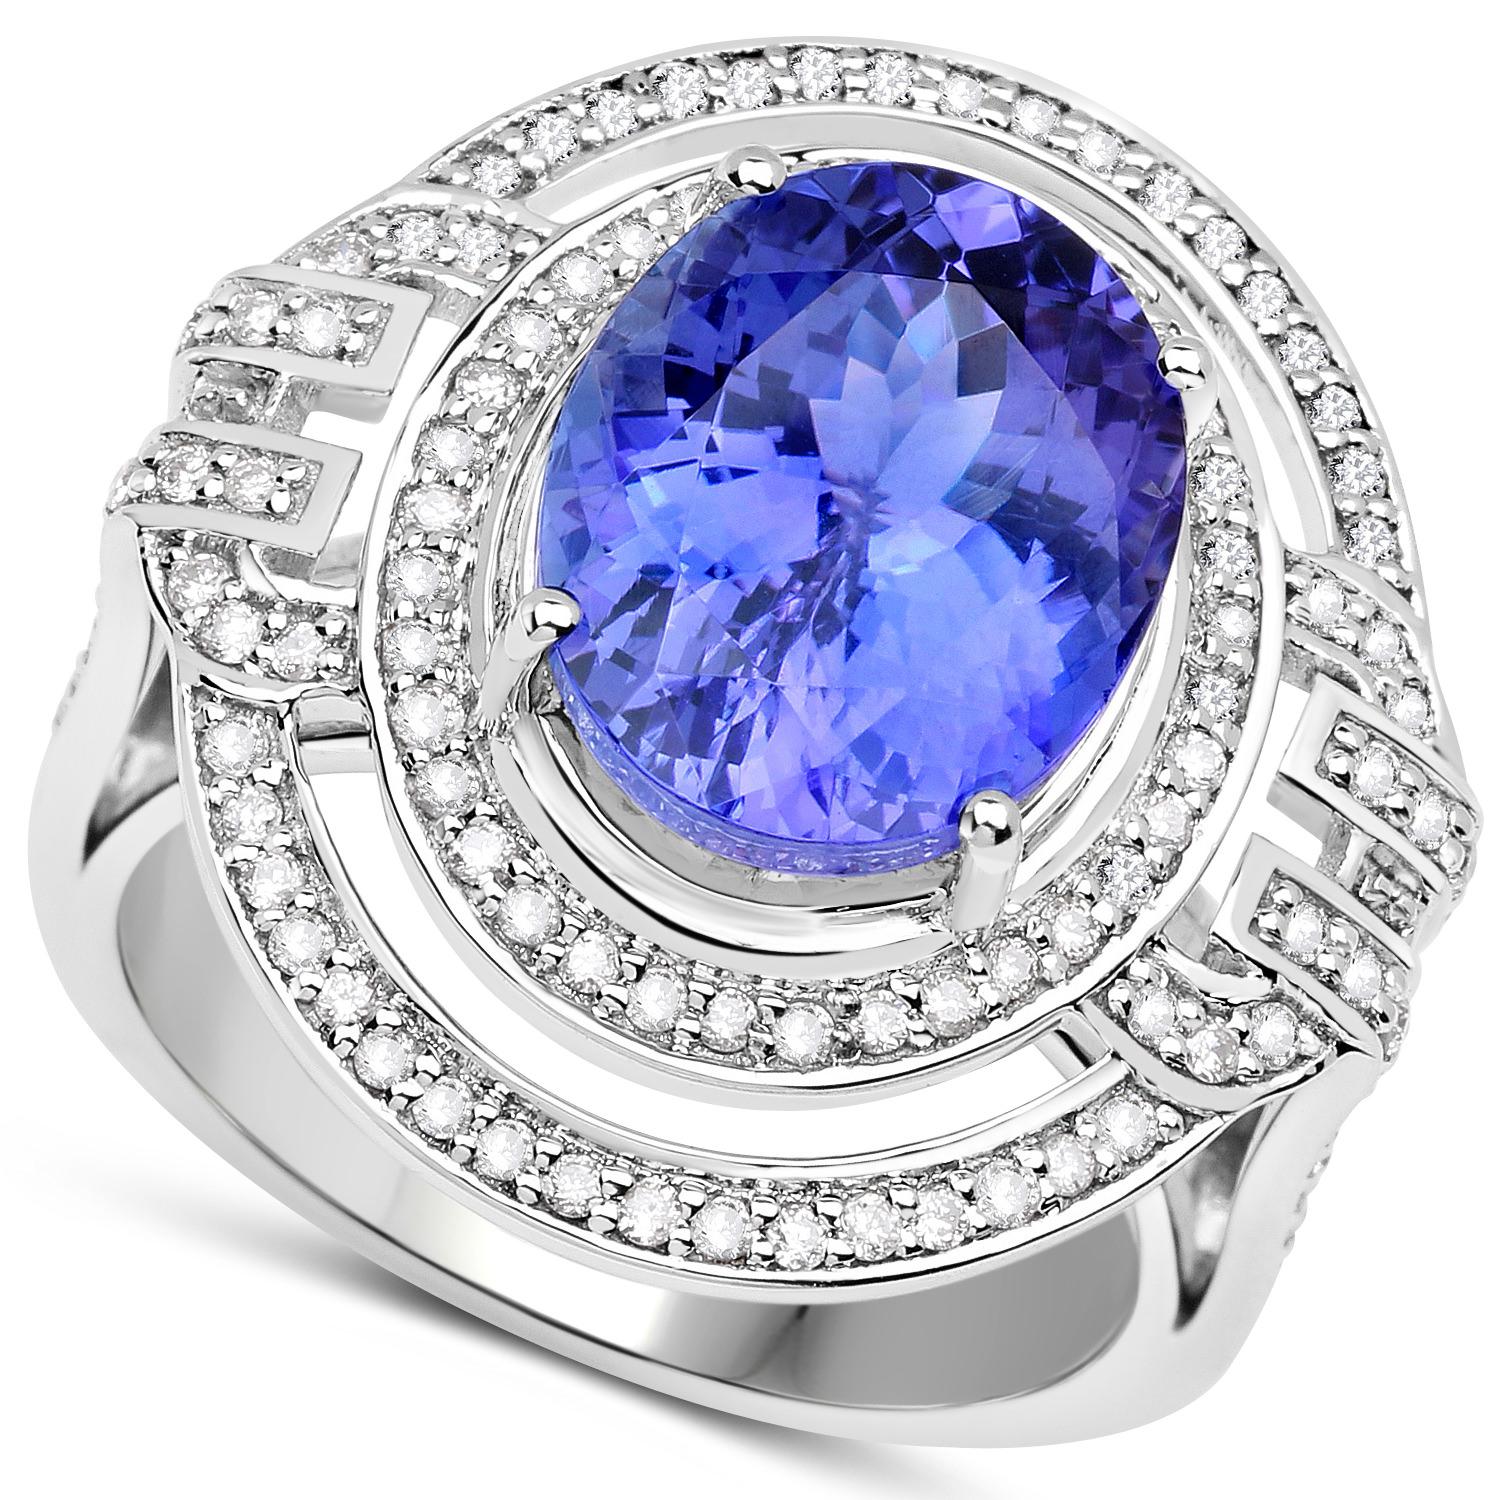 It comes with the appraisal by GIA GG/AJP
Tanzanite = 6.25 Carat (12.5 x 10 mm)
Cut: Oval
Diamonds = 0.60 Carats
Diamonds Quantity: 118
Metal: 14K White Gold
Ring Size: 7* US
*It can be resized complimentary